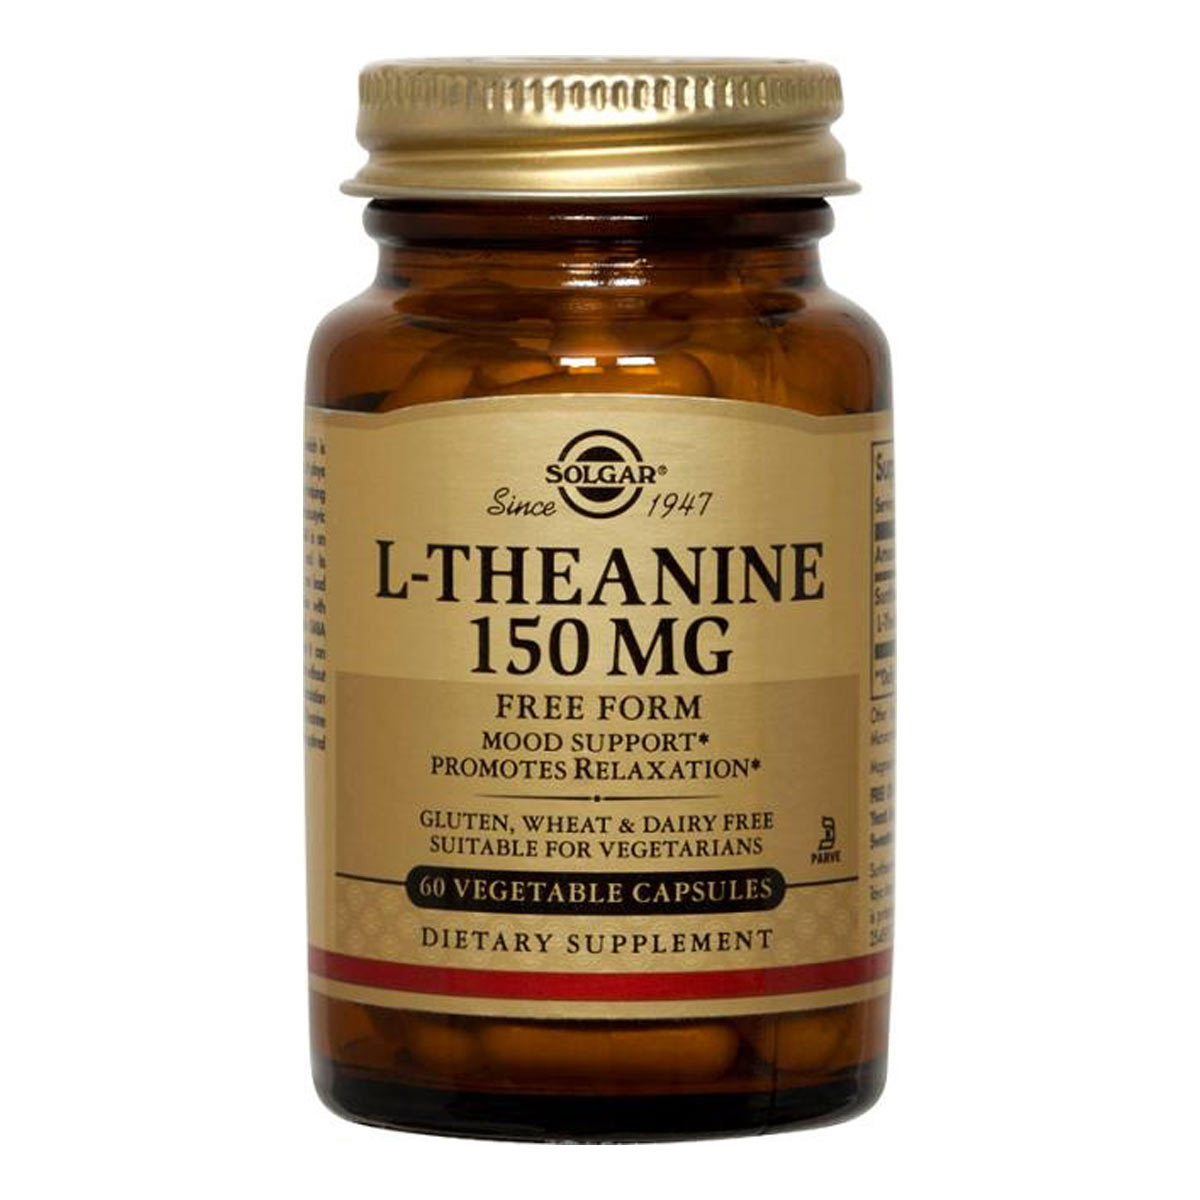 Primary image of L-Theanine 150mg